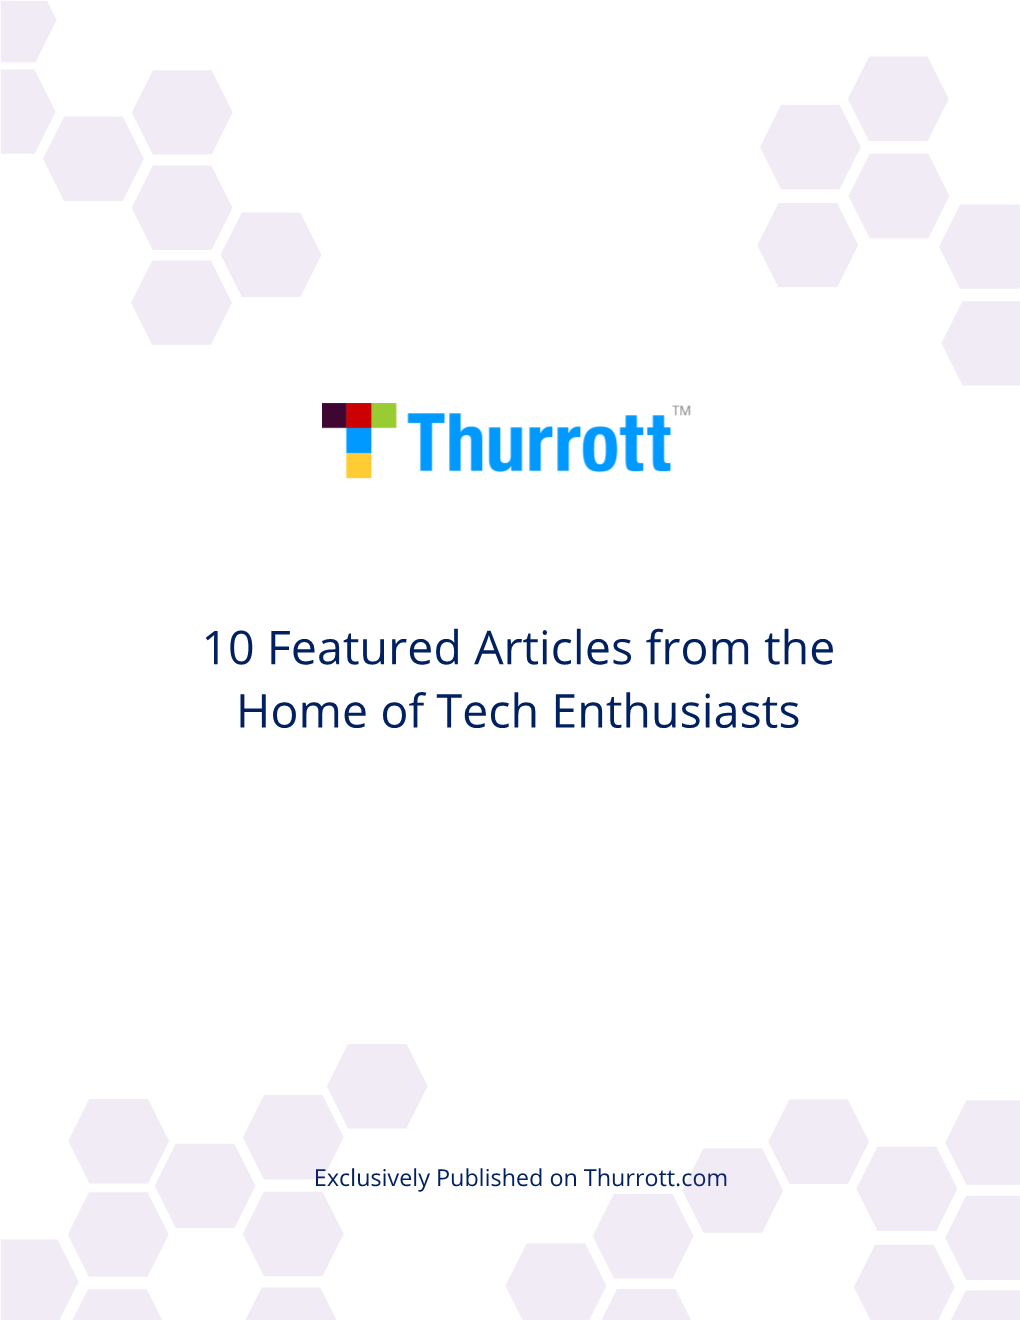 10 Featured Articles from the Home of Tech Enthusiasts